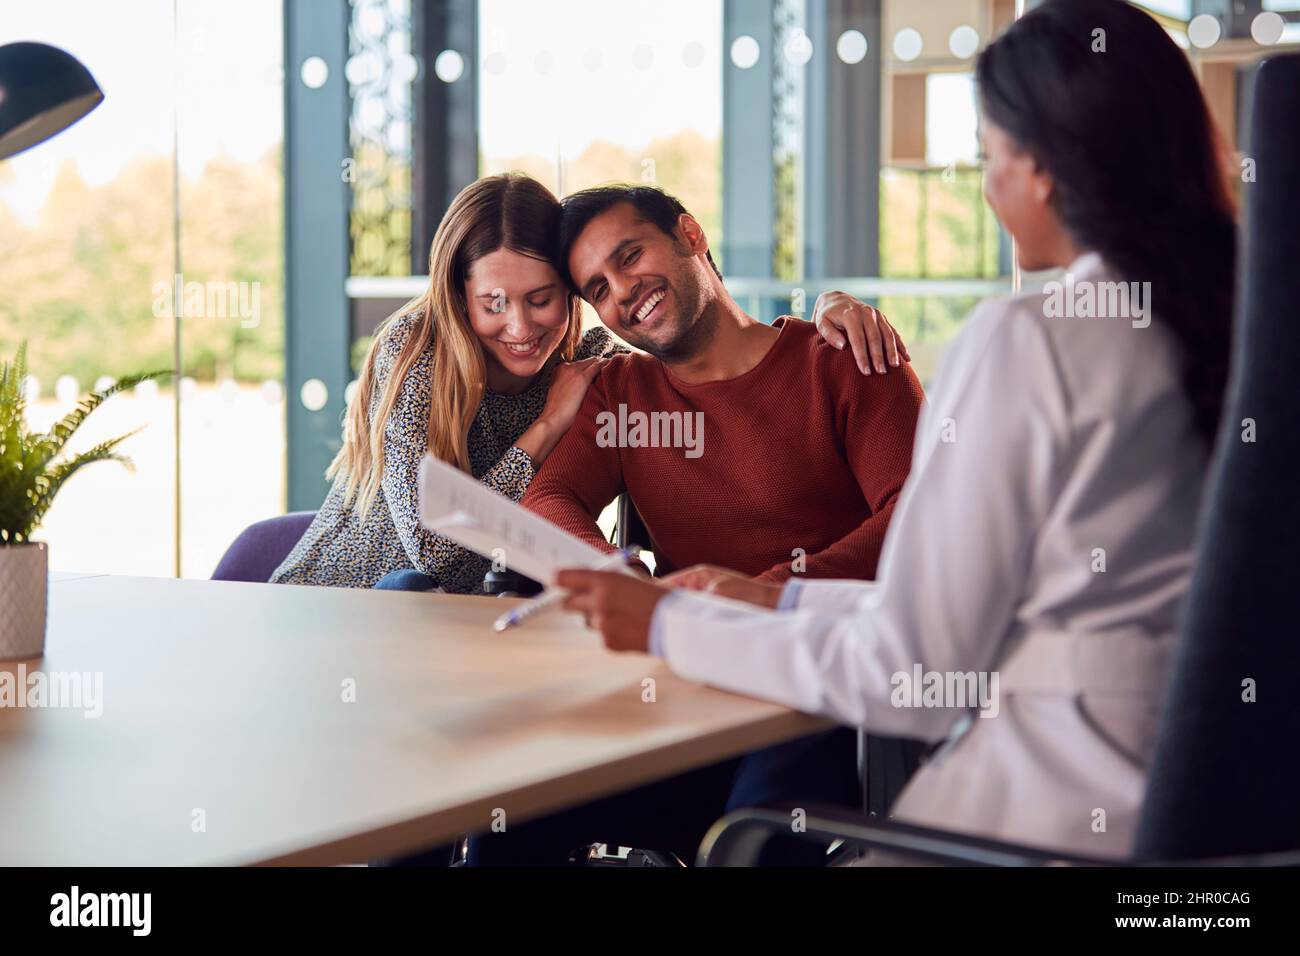 Woman Doctor Discussing Test Results With Smiling Couple n Hospital Stock Photo